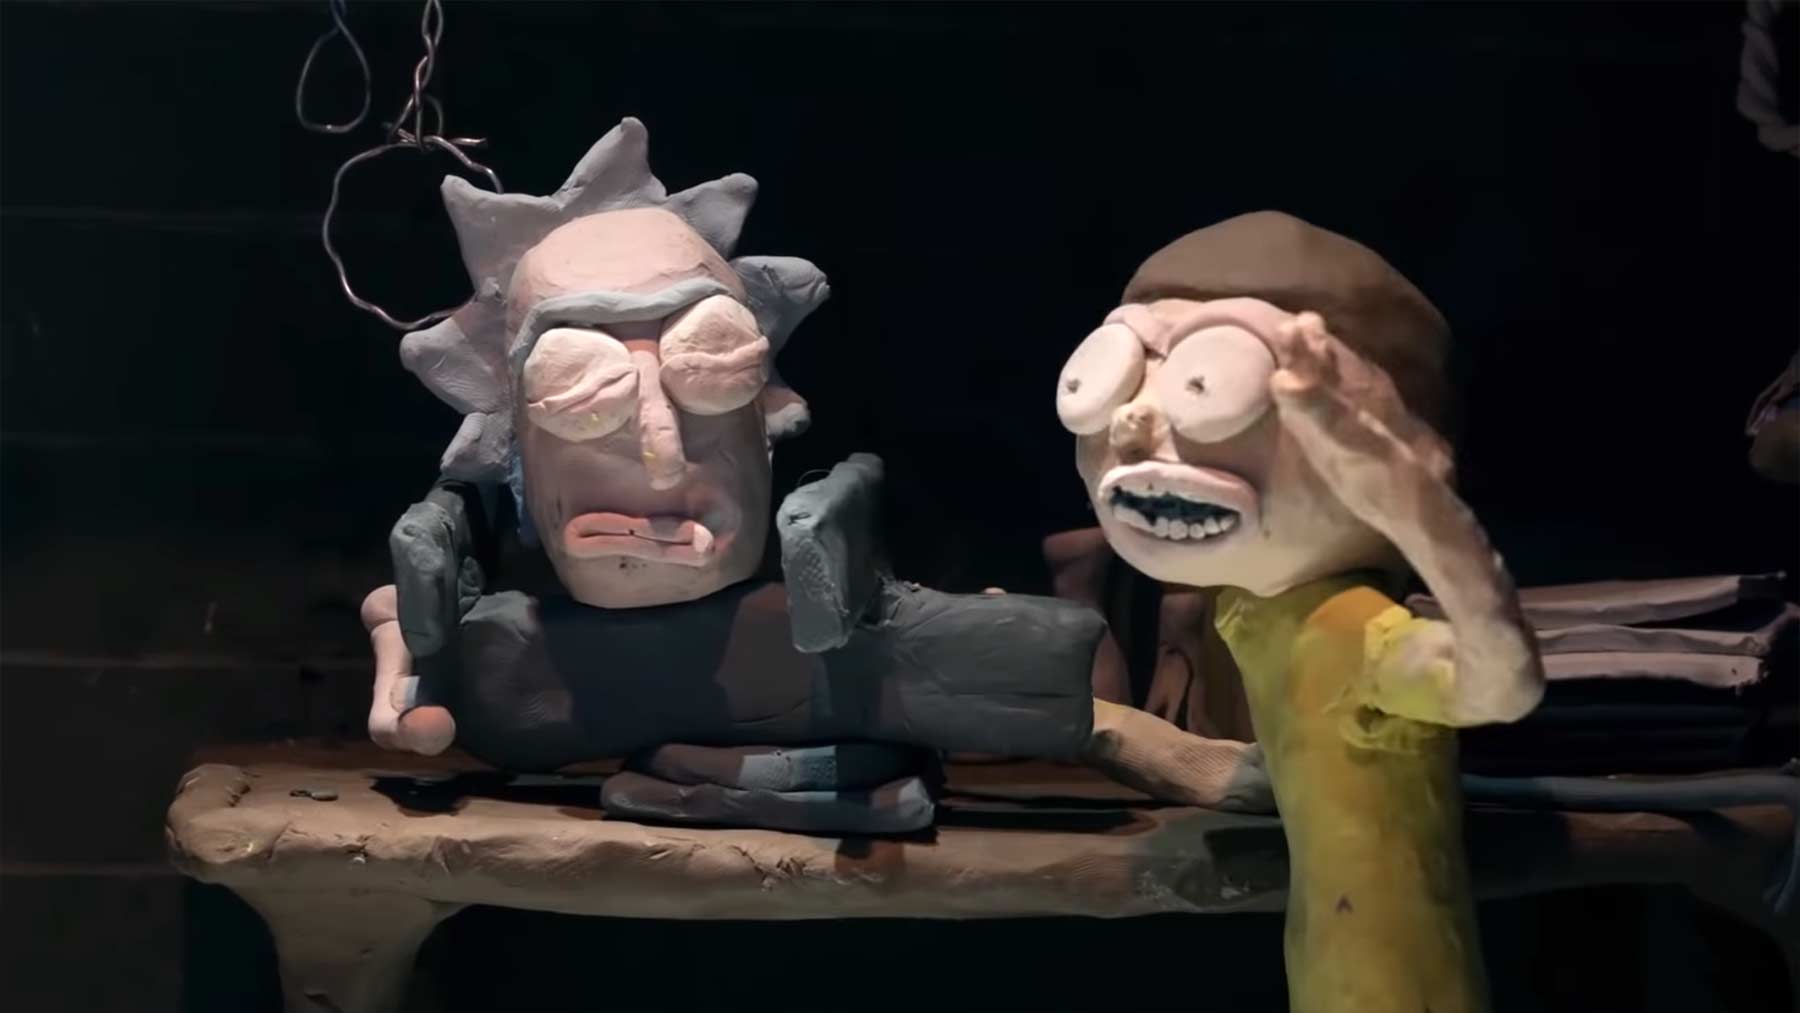 Rick and Morty: The Non-Canonical Halloween Adventures 2019